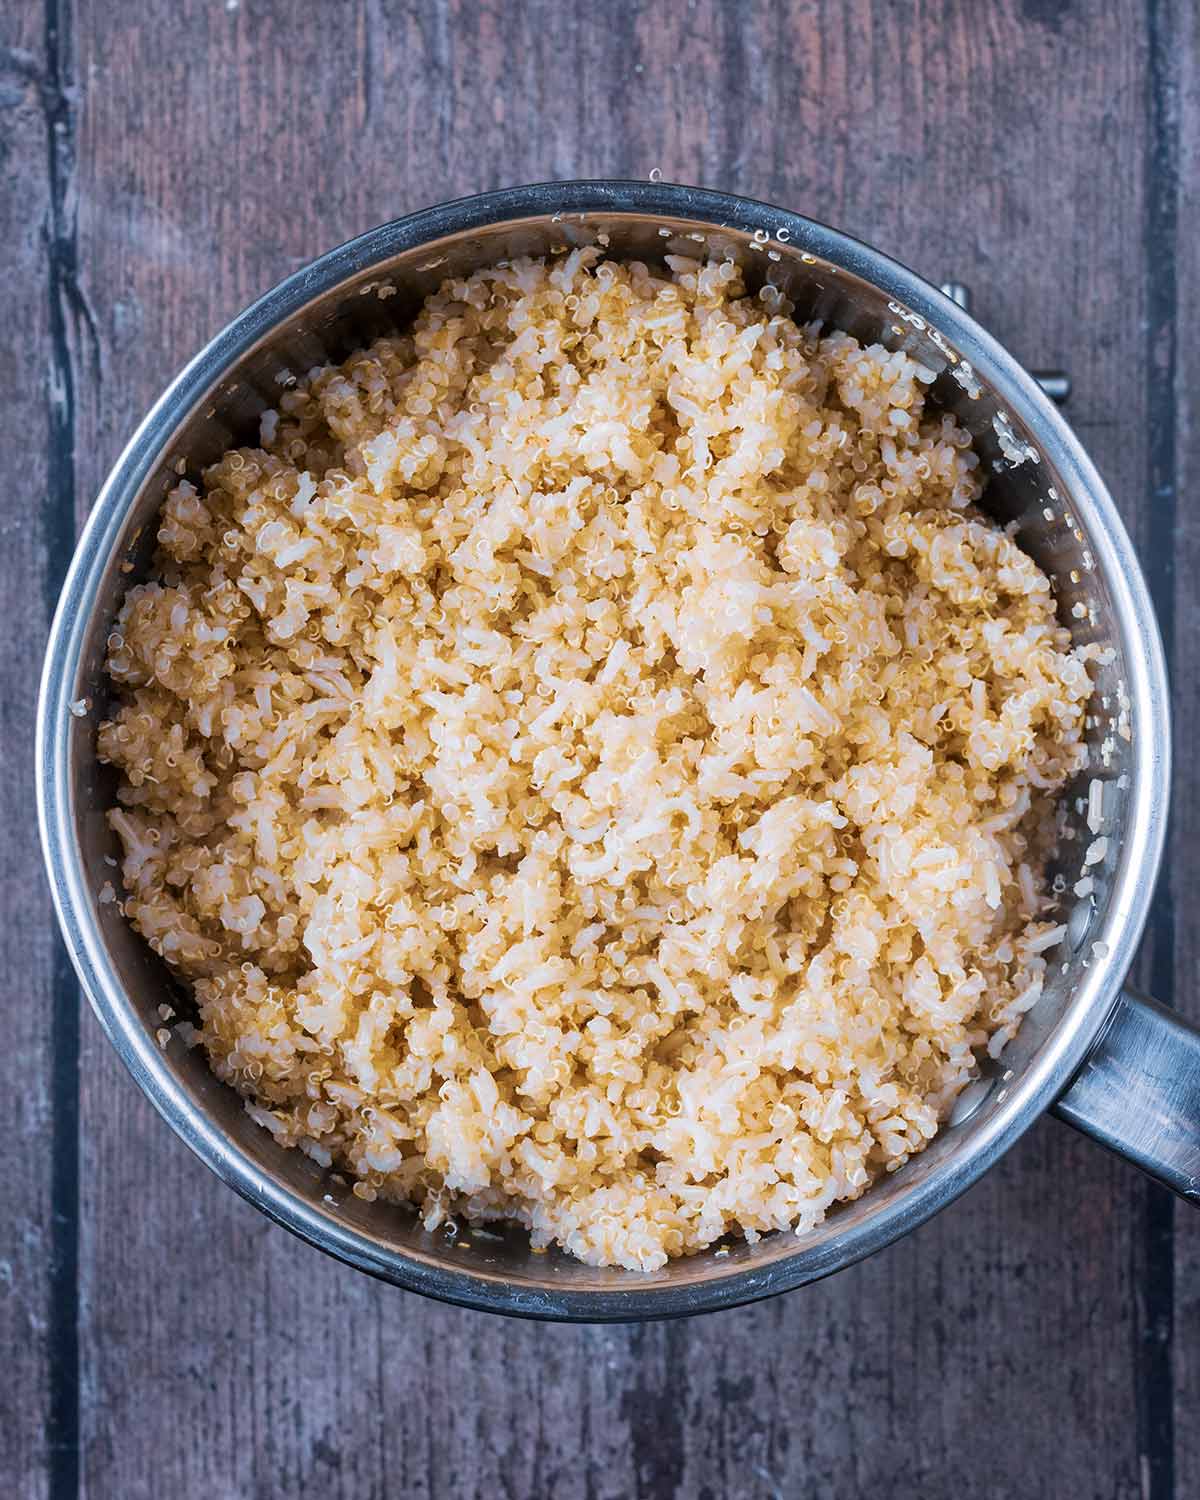 Cooked rice and quinoa in a saucepan.